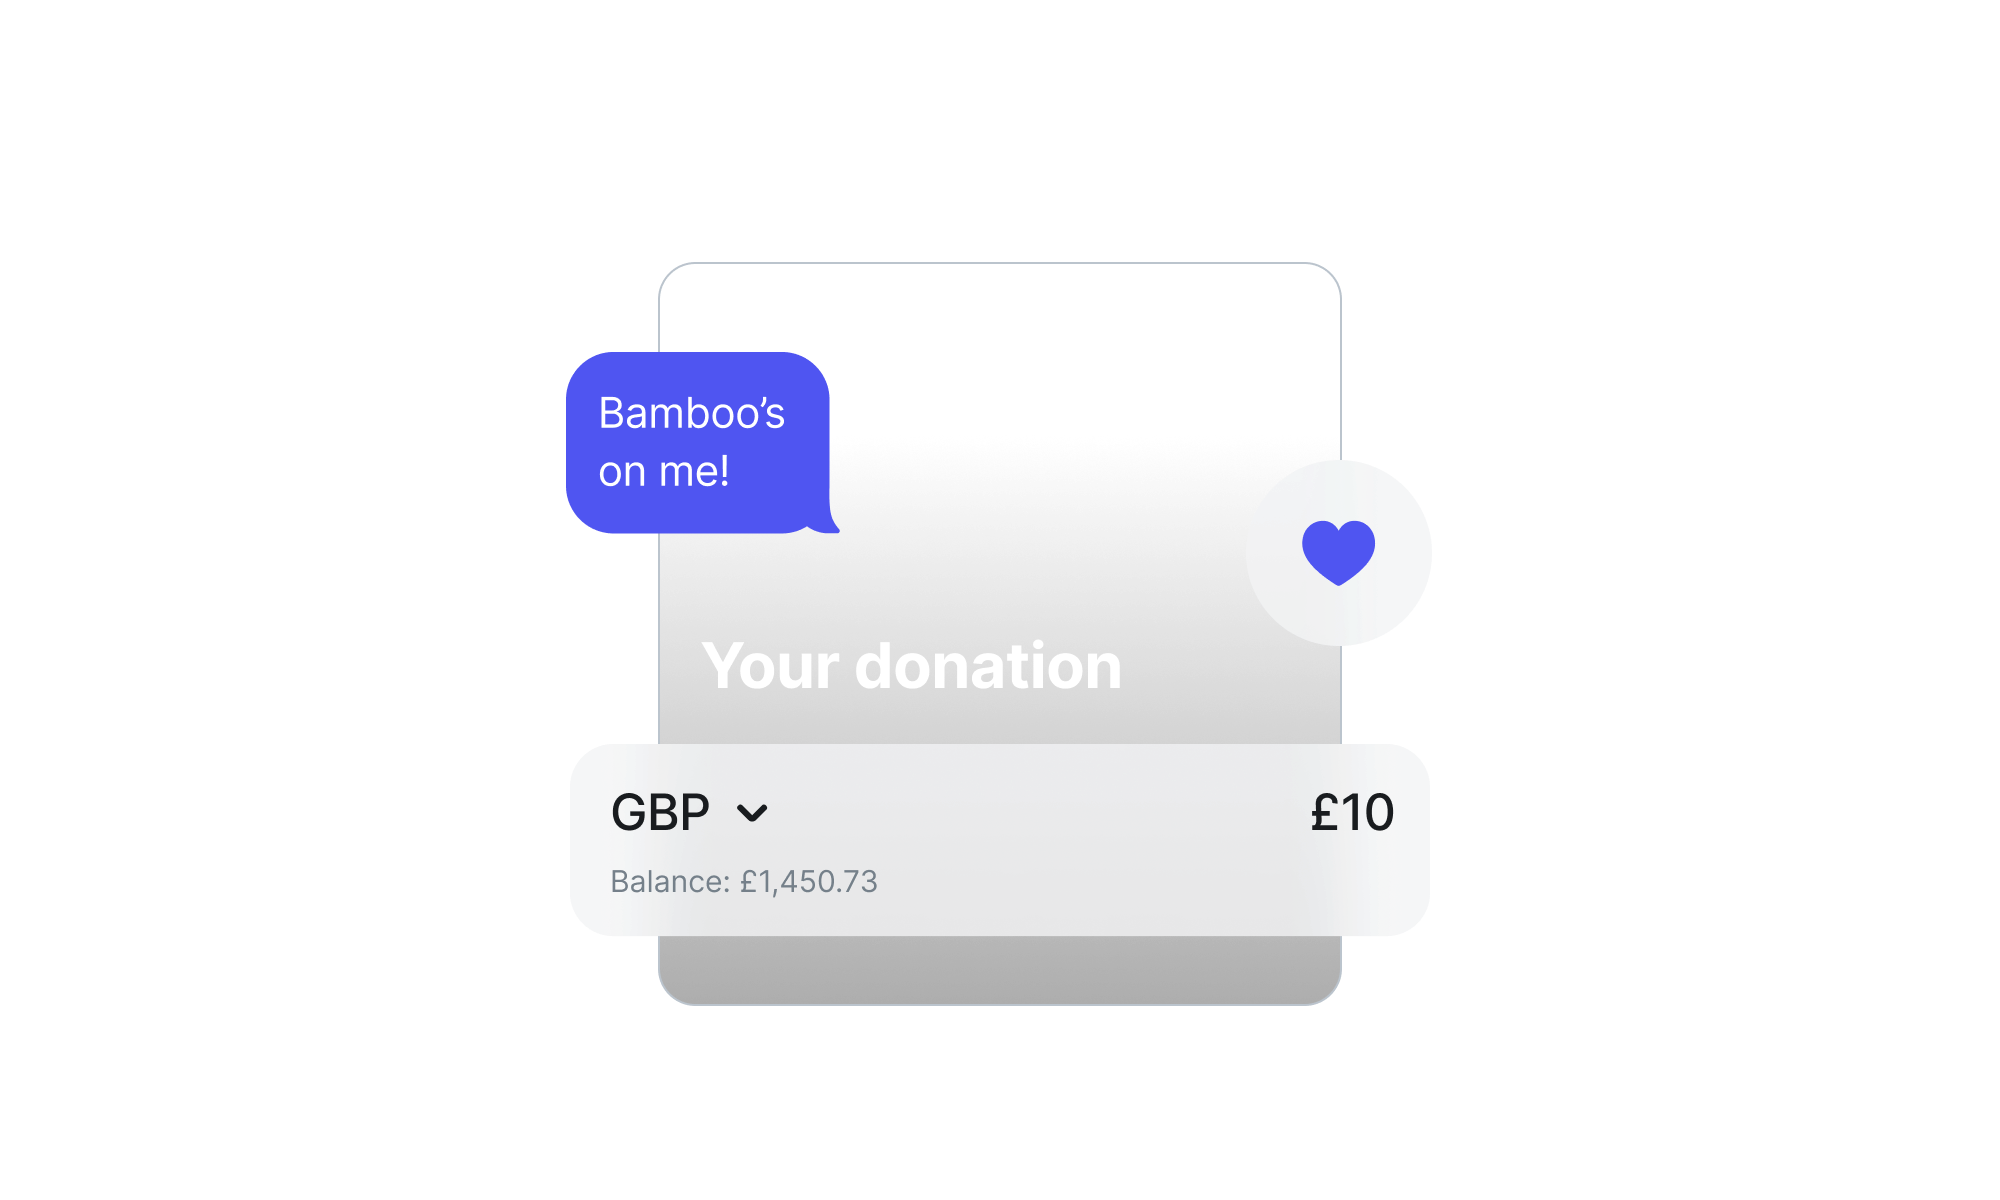 Donating, as easy as a tap